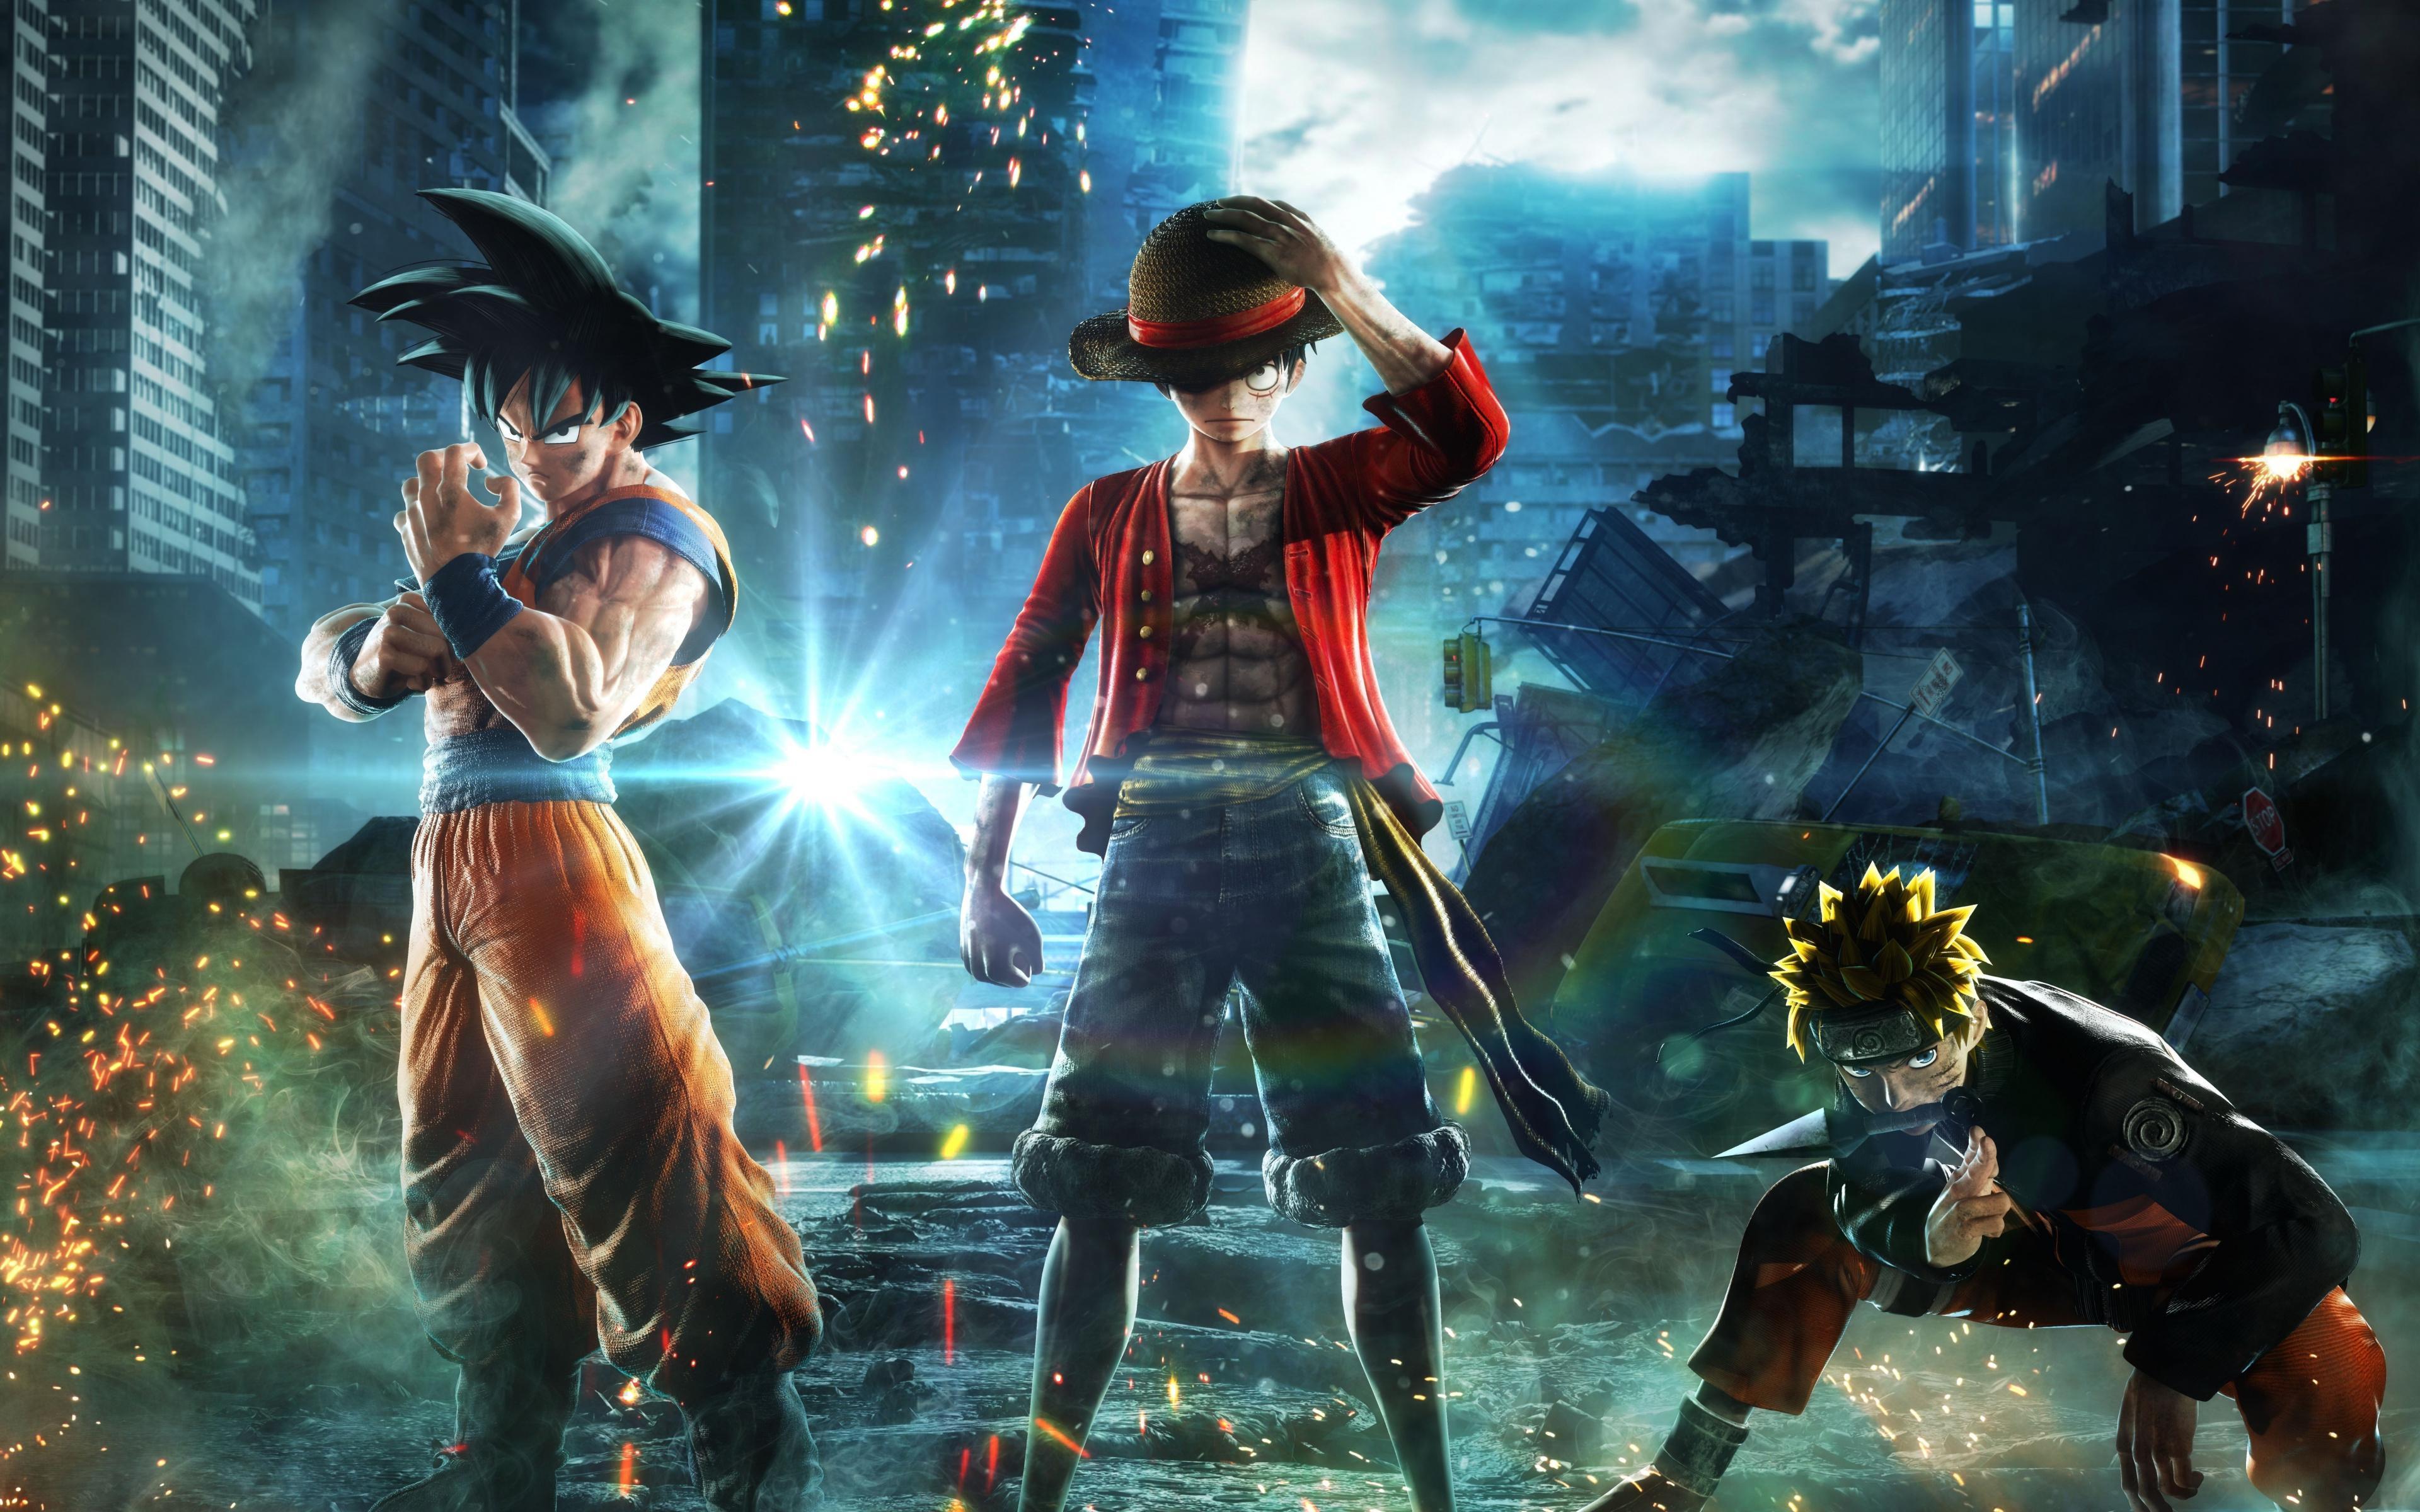 Download 3840x2400 wallpaper jump force, anime video game